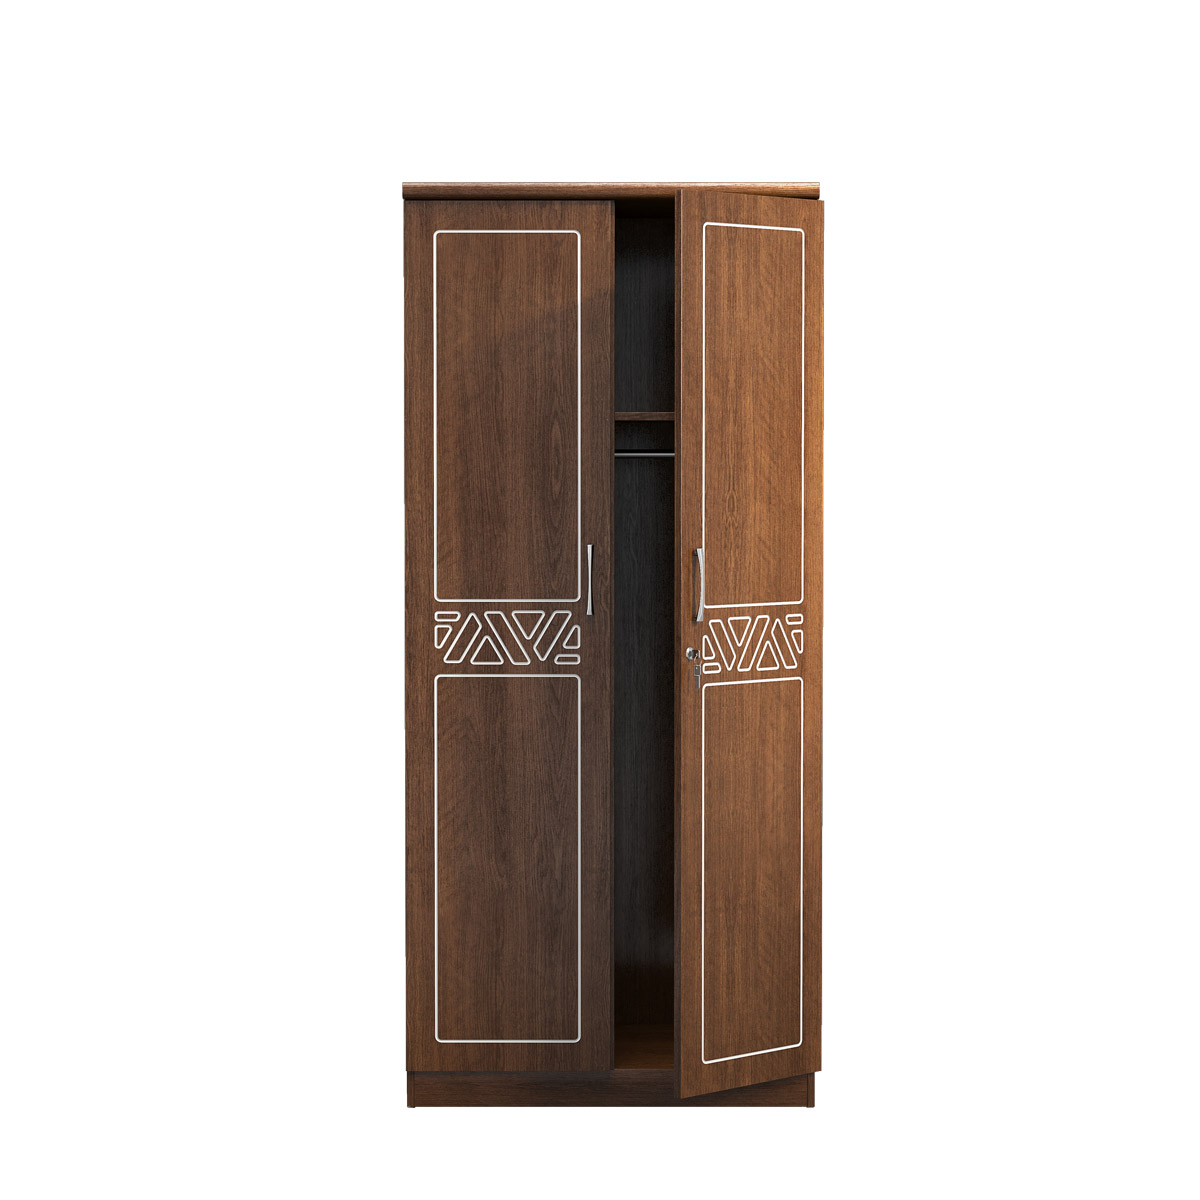 CUPBOARD- ORION CBH-147-1-1-20